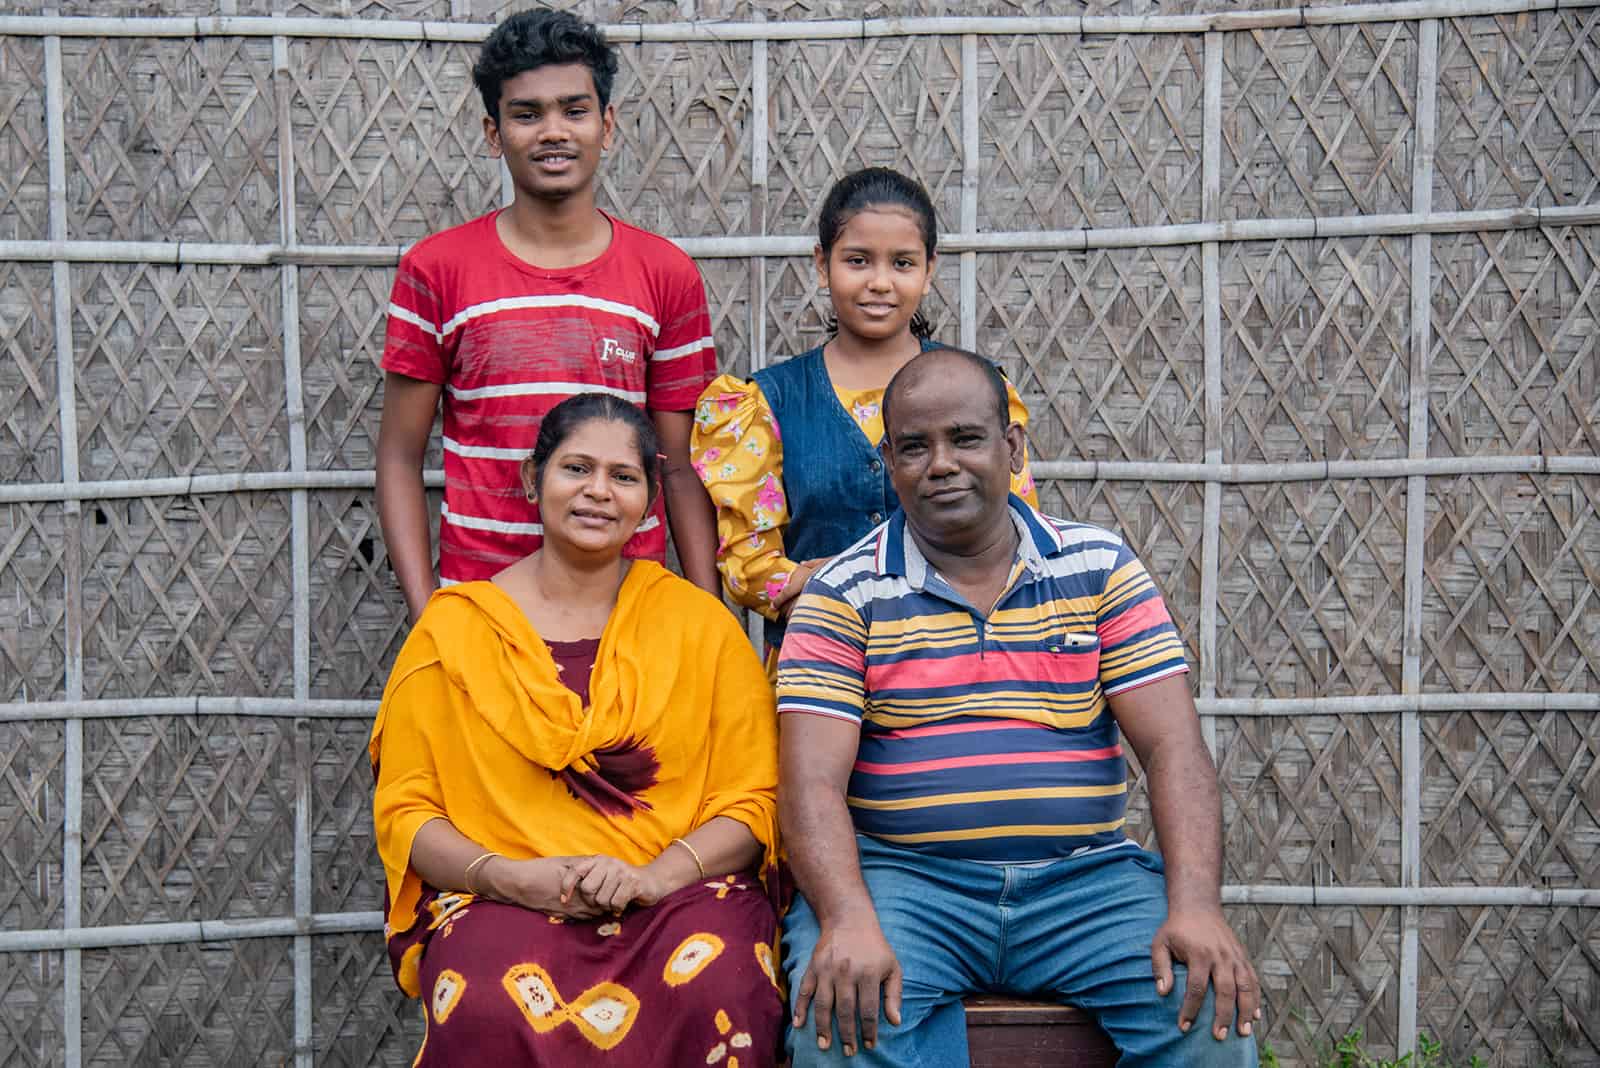 Sanjoy, in a red and white shirt, is with his family posing for a photo. His mother, in yellow, is sitting next to his father, Subhas. Sanjoy's sister is standing next to him. They are in front of a bamboo wall.